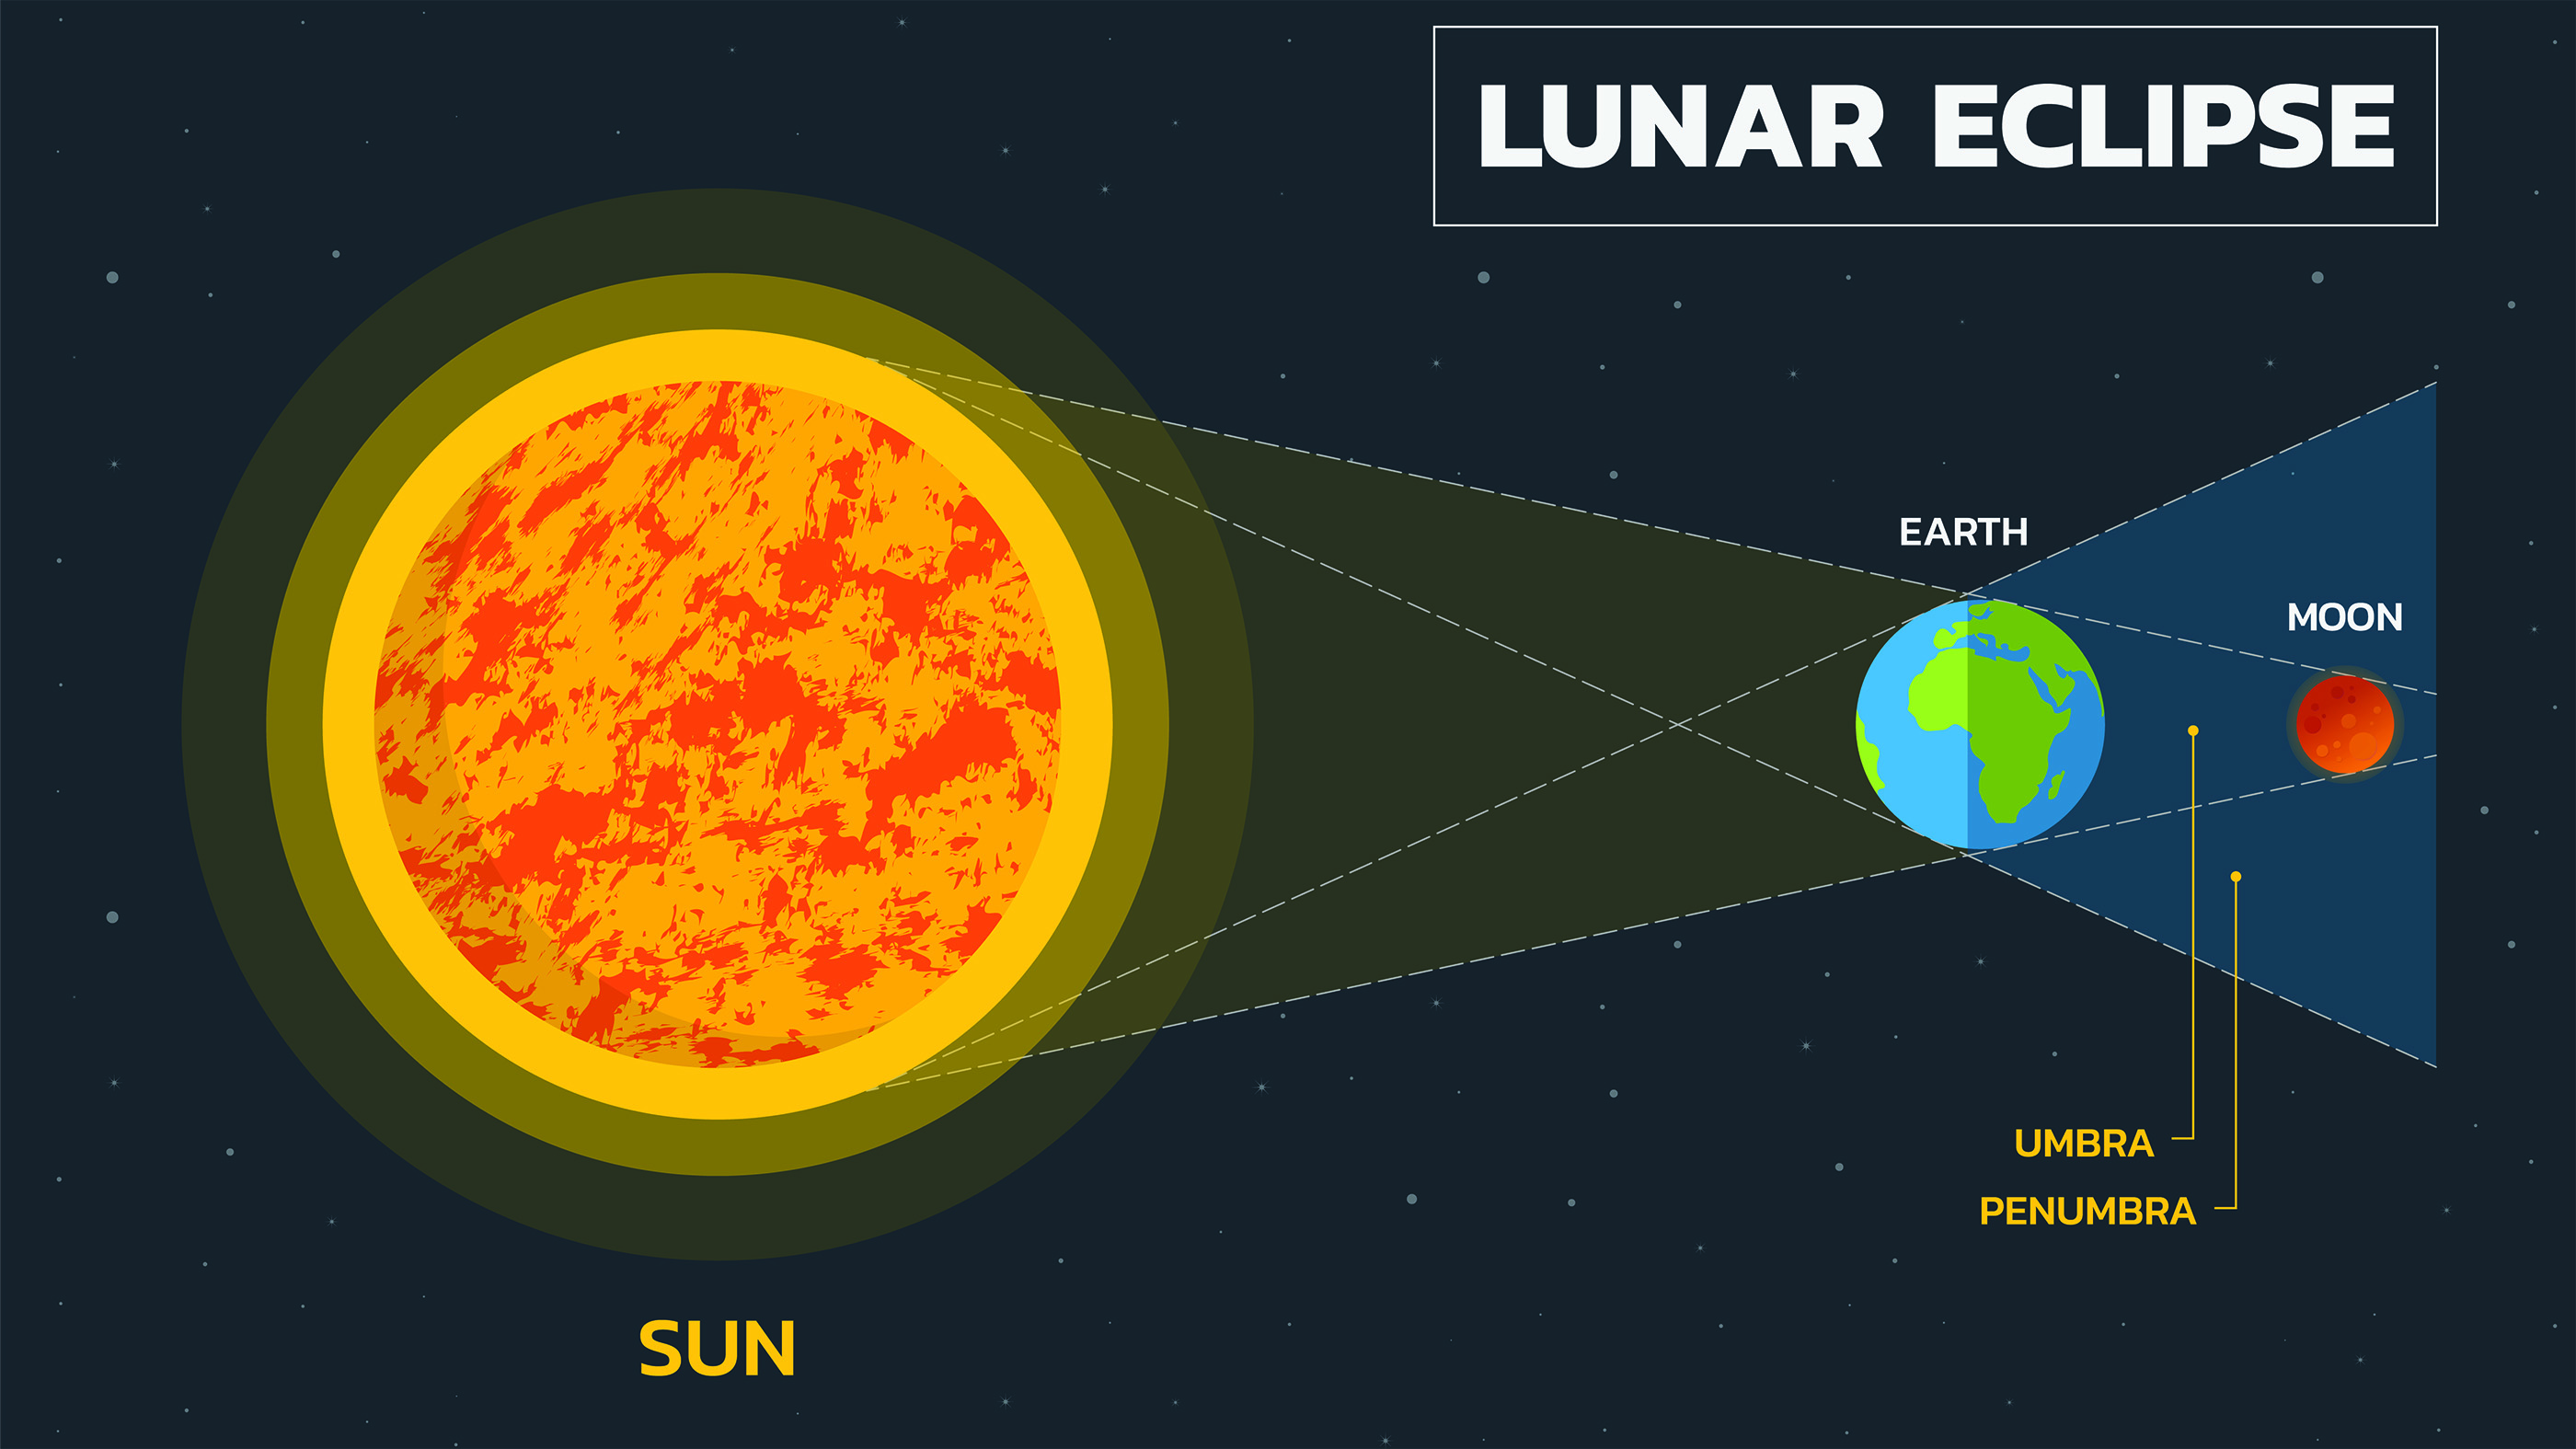 A lunar eclipse occurs when the sun, moon, and earth are in the correct order.